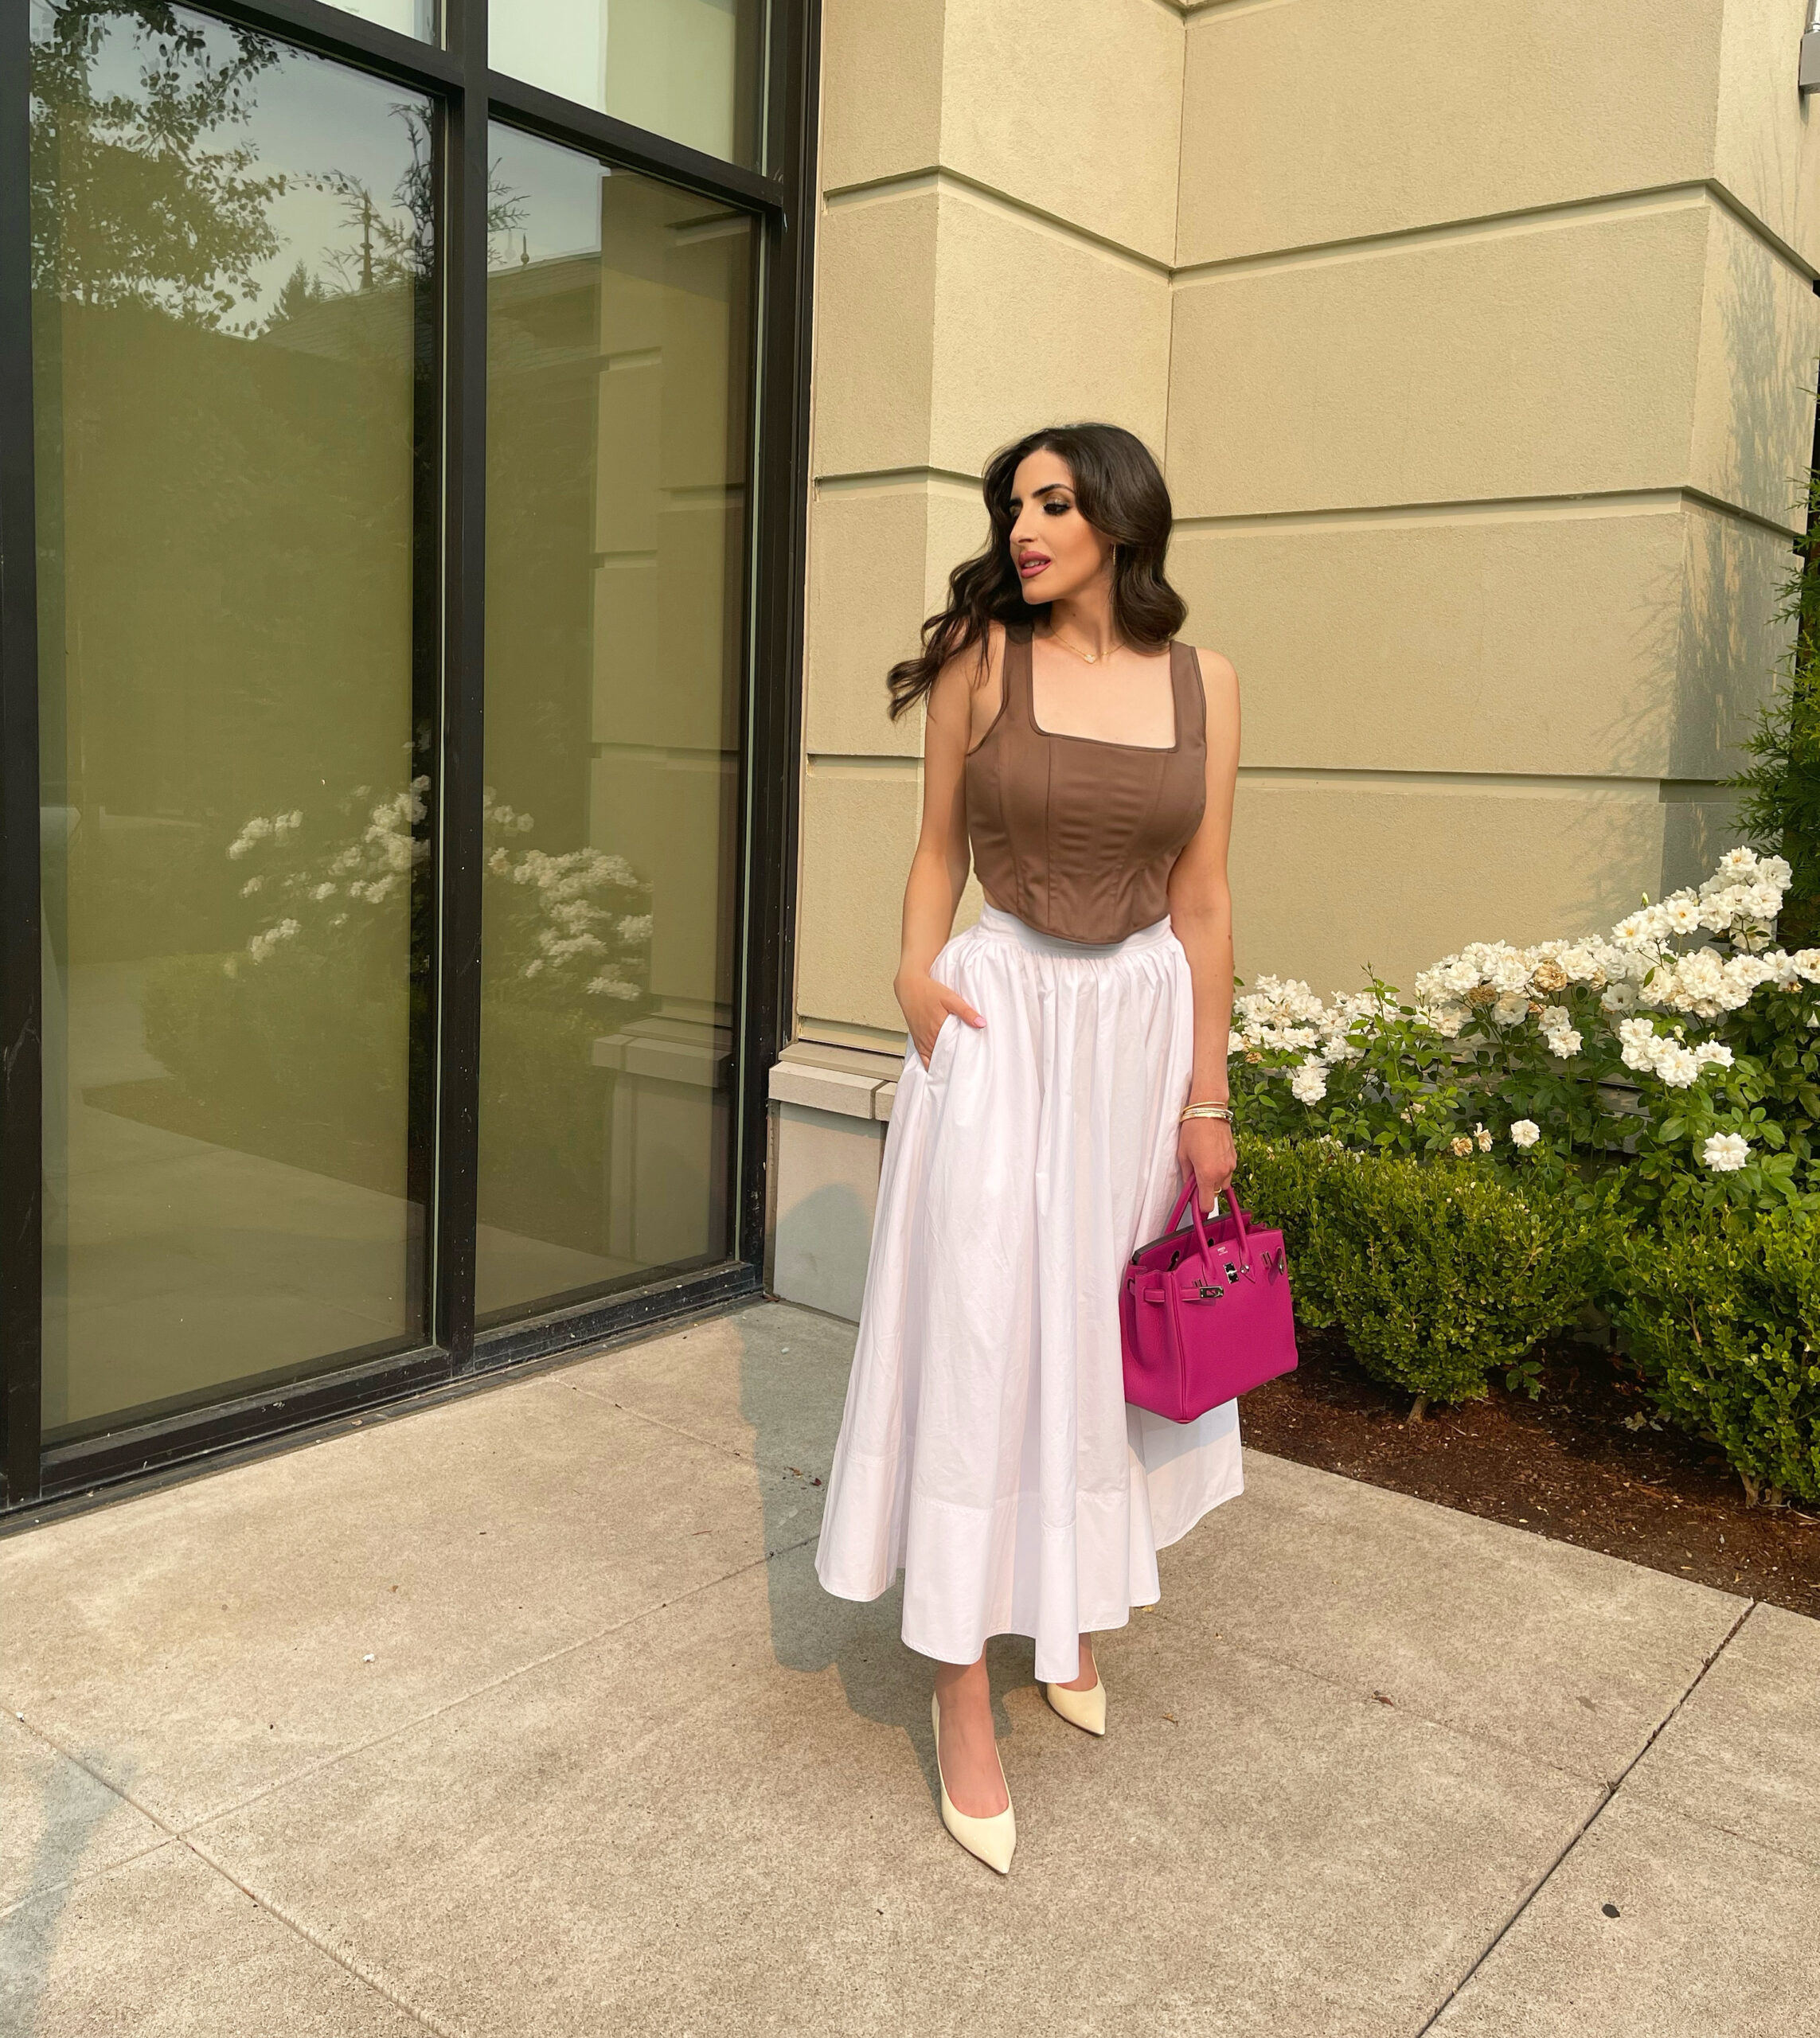 LADIES WHO BRUNCH: SUMMER STYLE